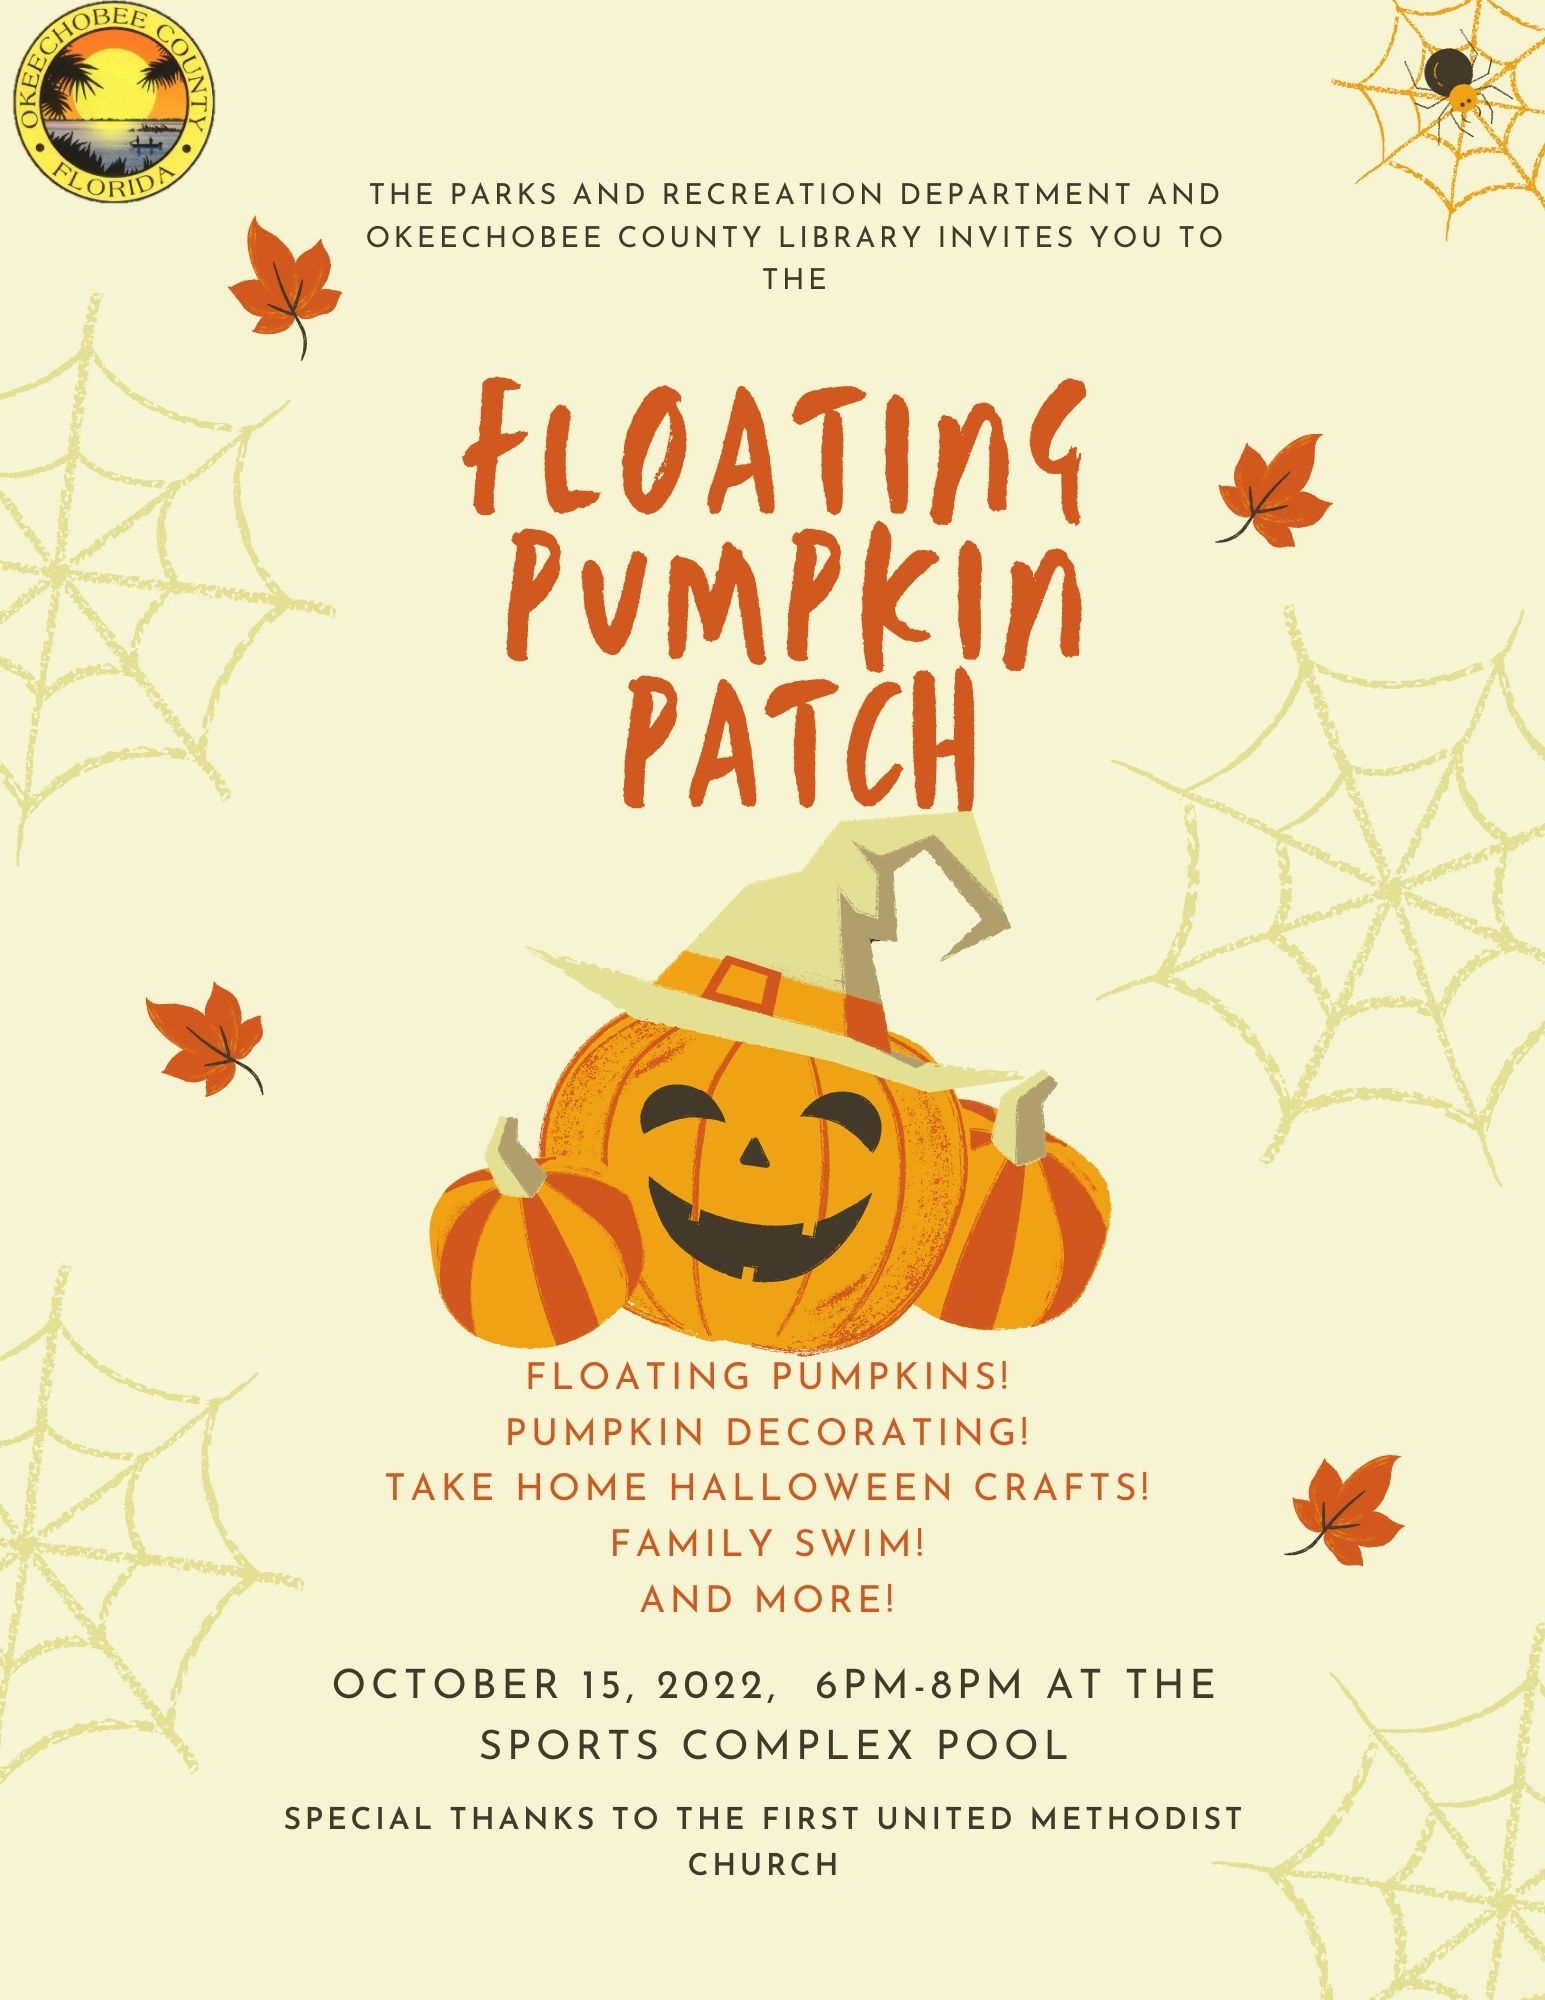 "The Okeechobee County Parks & Recreation and Okeechobee Library invite you to this year's Floating Pumpkin Patch on Saturday, October 15th from 6:00 - 8:00 p.m.!"